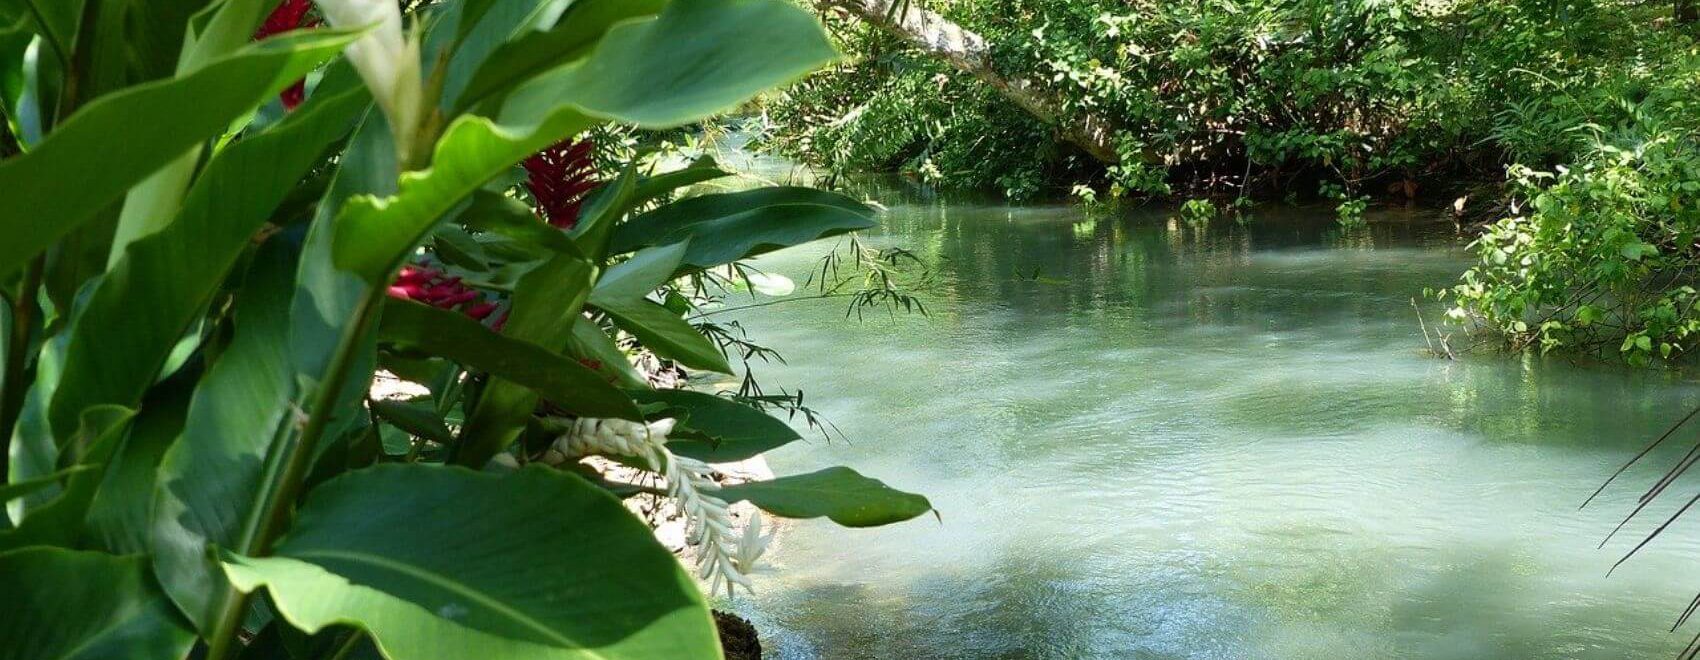 facts-about-jamaica-river